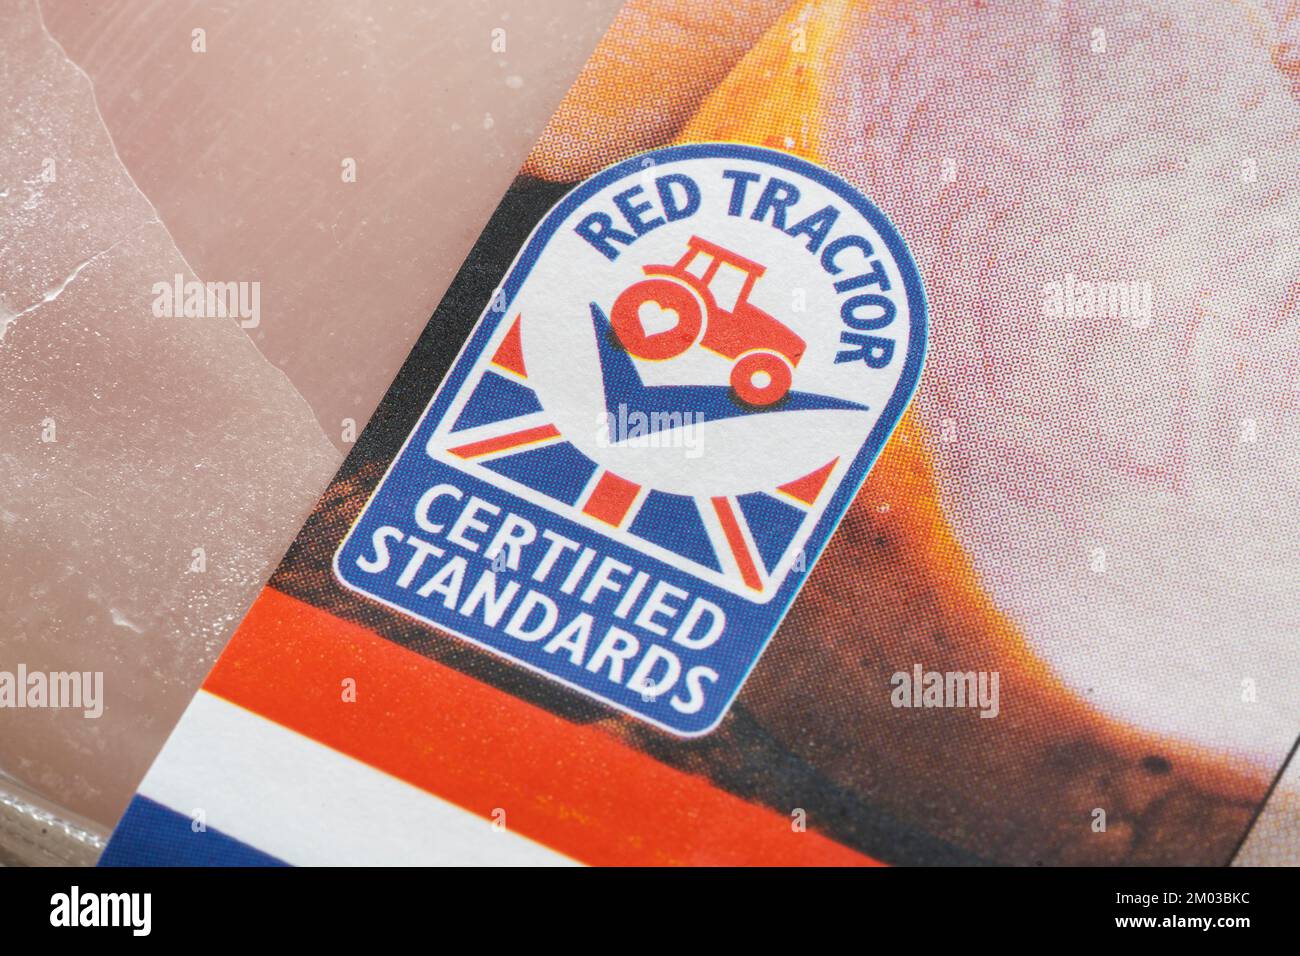 Closeup on Red Tractor logo. Assured Food Standards is a UK company which licenses the Red Tractor quality mark, a product certification programme Stock Photo